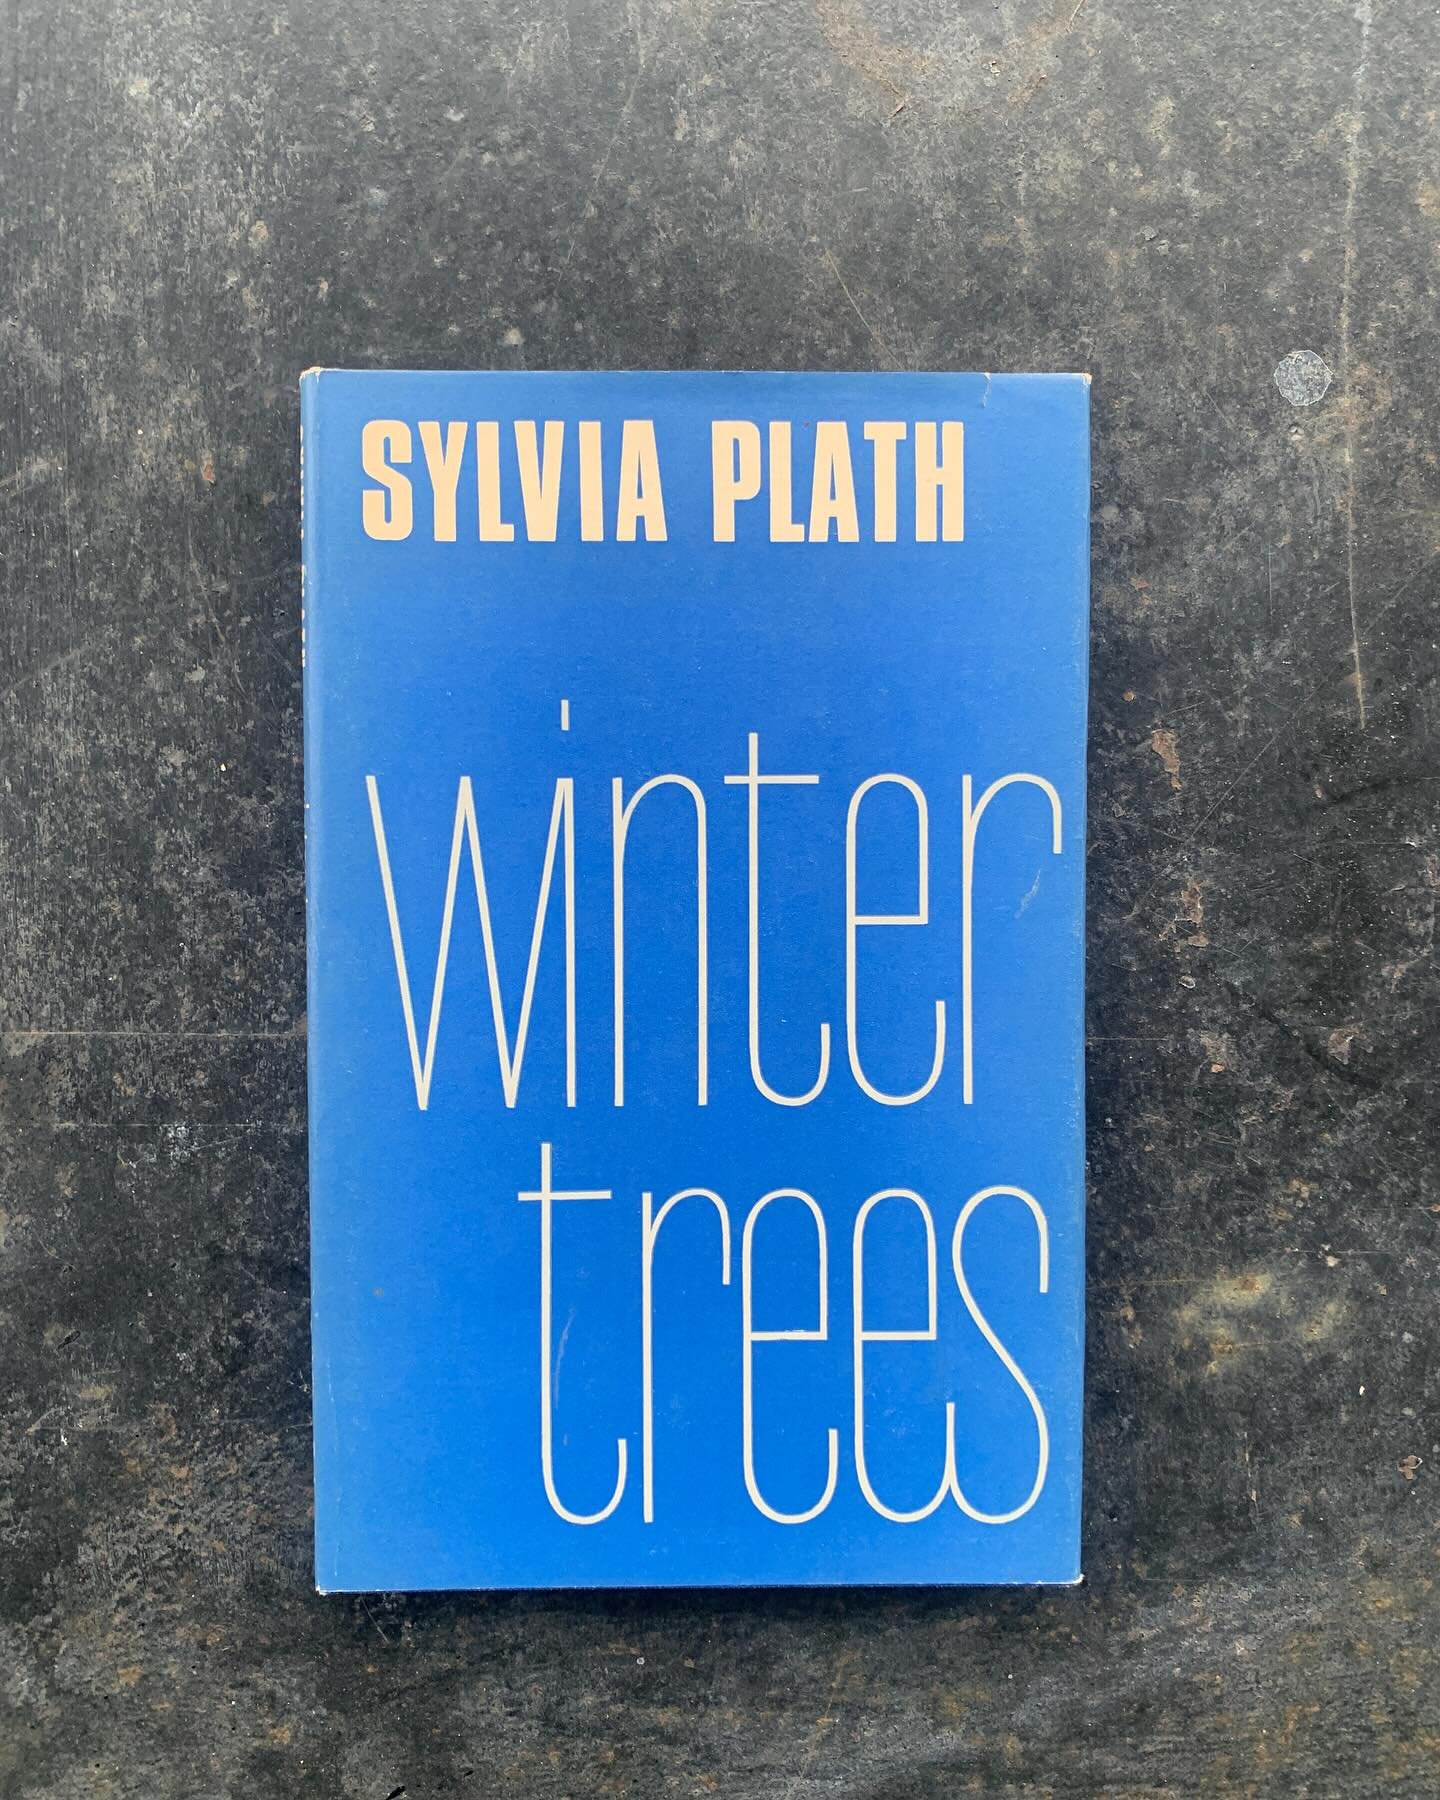 First edition of Winter Trees by Sylvia Plath. Great condition, available at the shop.
#sylviaplath 
#plath
#antiquarianbooks 
#londonbookshops 
#booksellers
#poetry
#modernpoetry